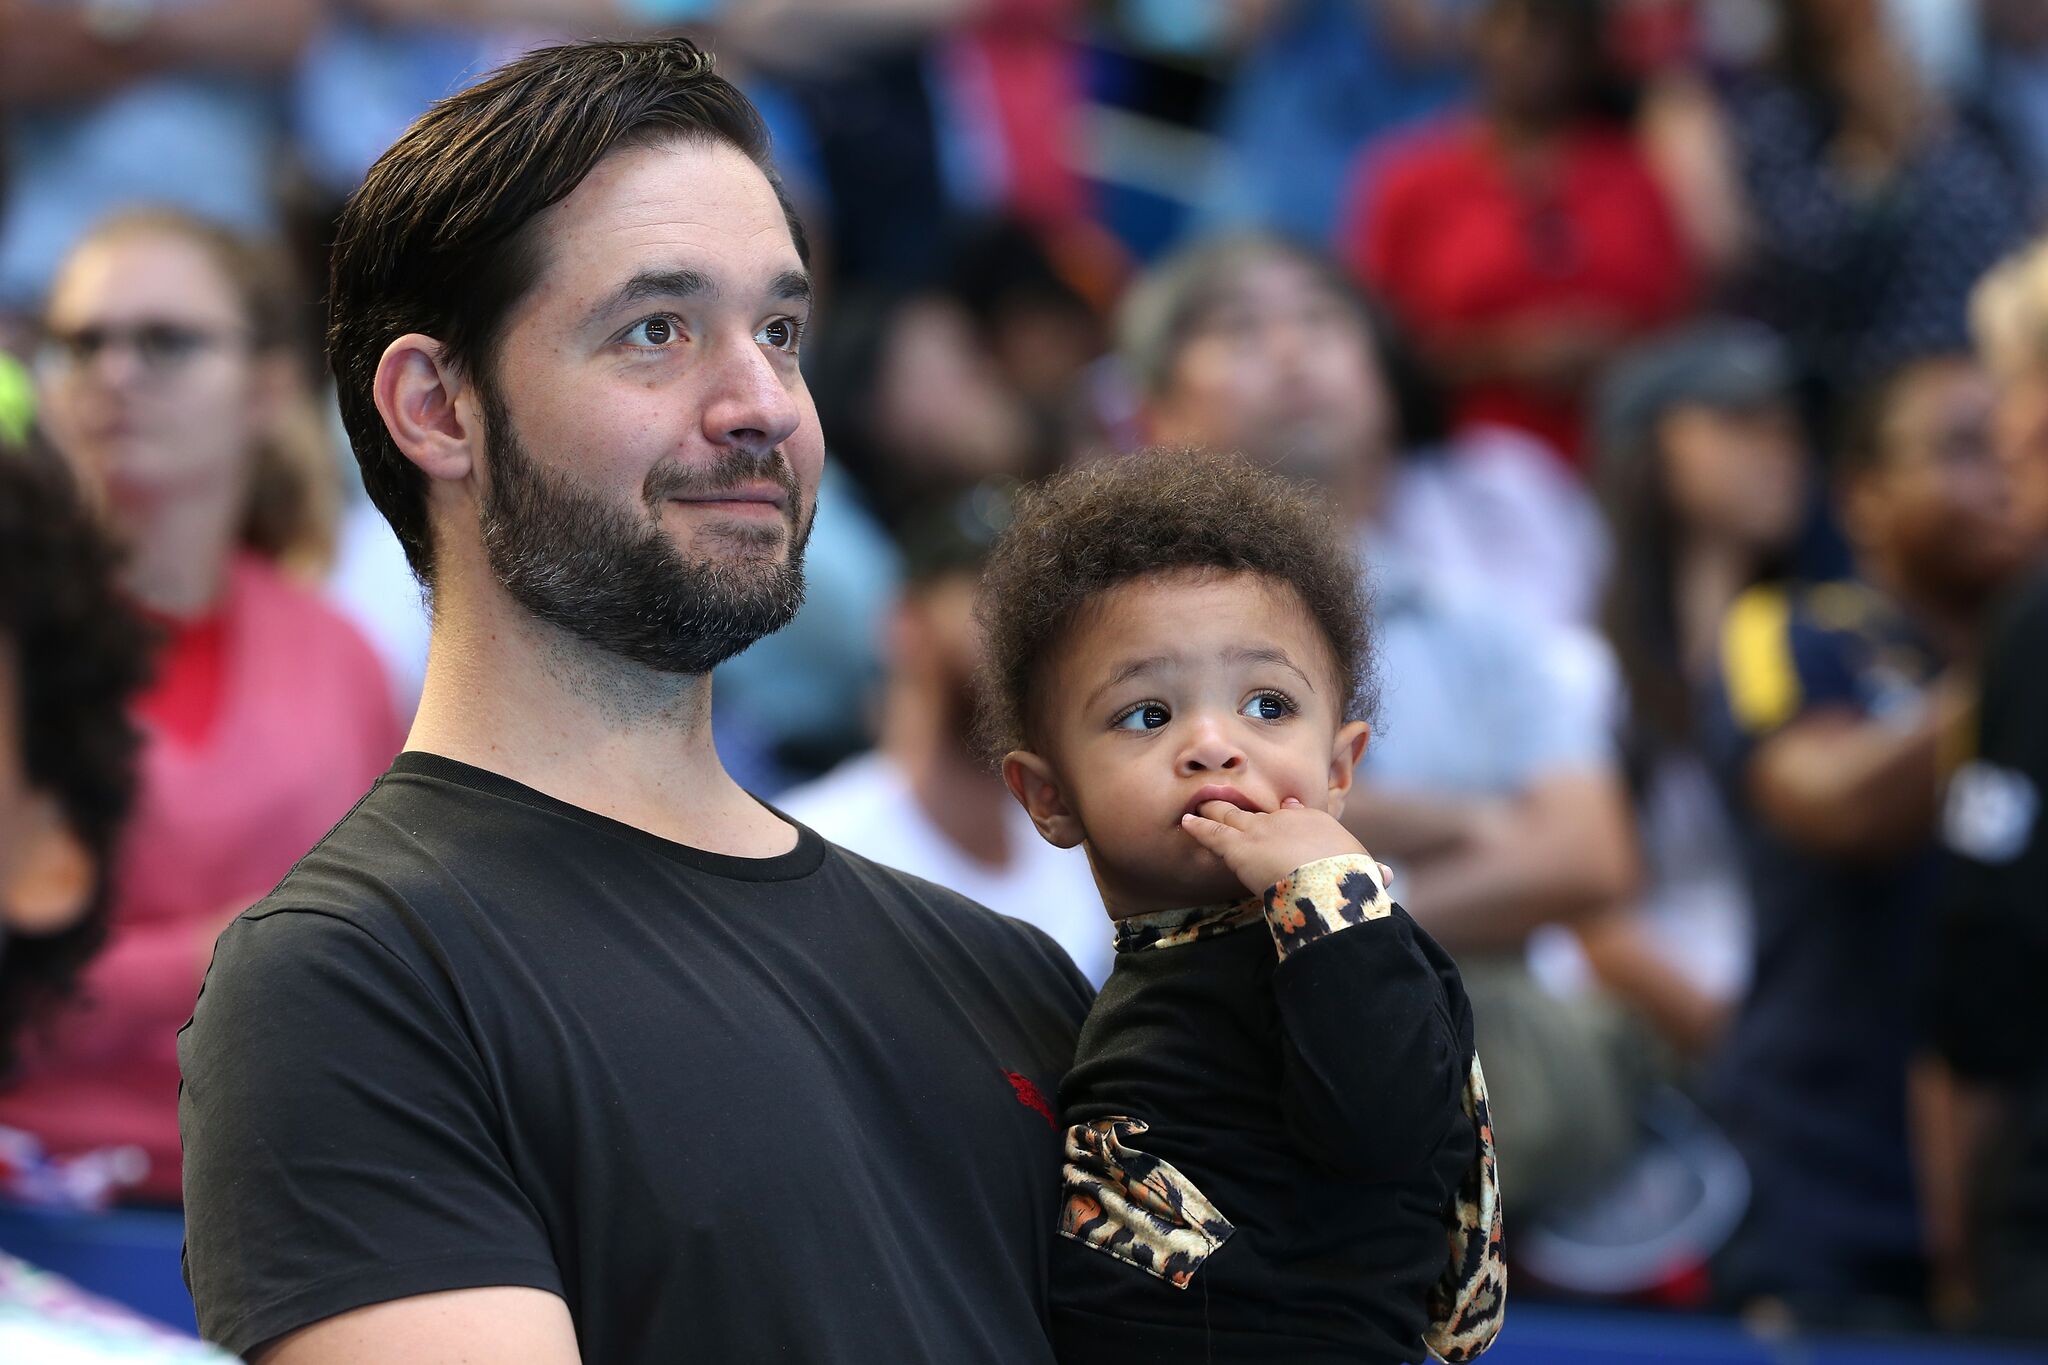 Serena Williams's husband Alexis Ohanian, holds their daughter Alexis Olympia Ohanian Jr. following the women's singles match | Getty Images